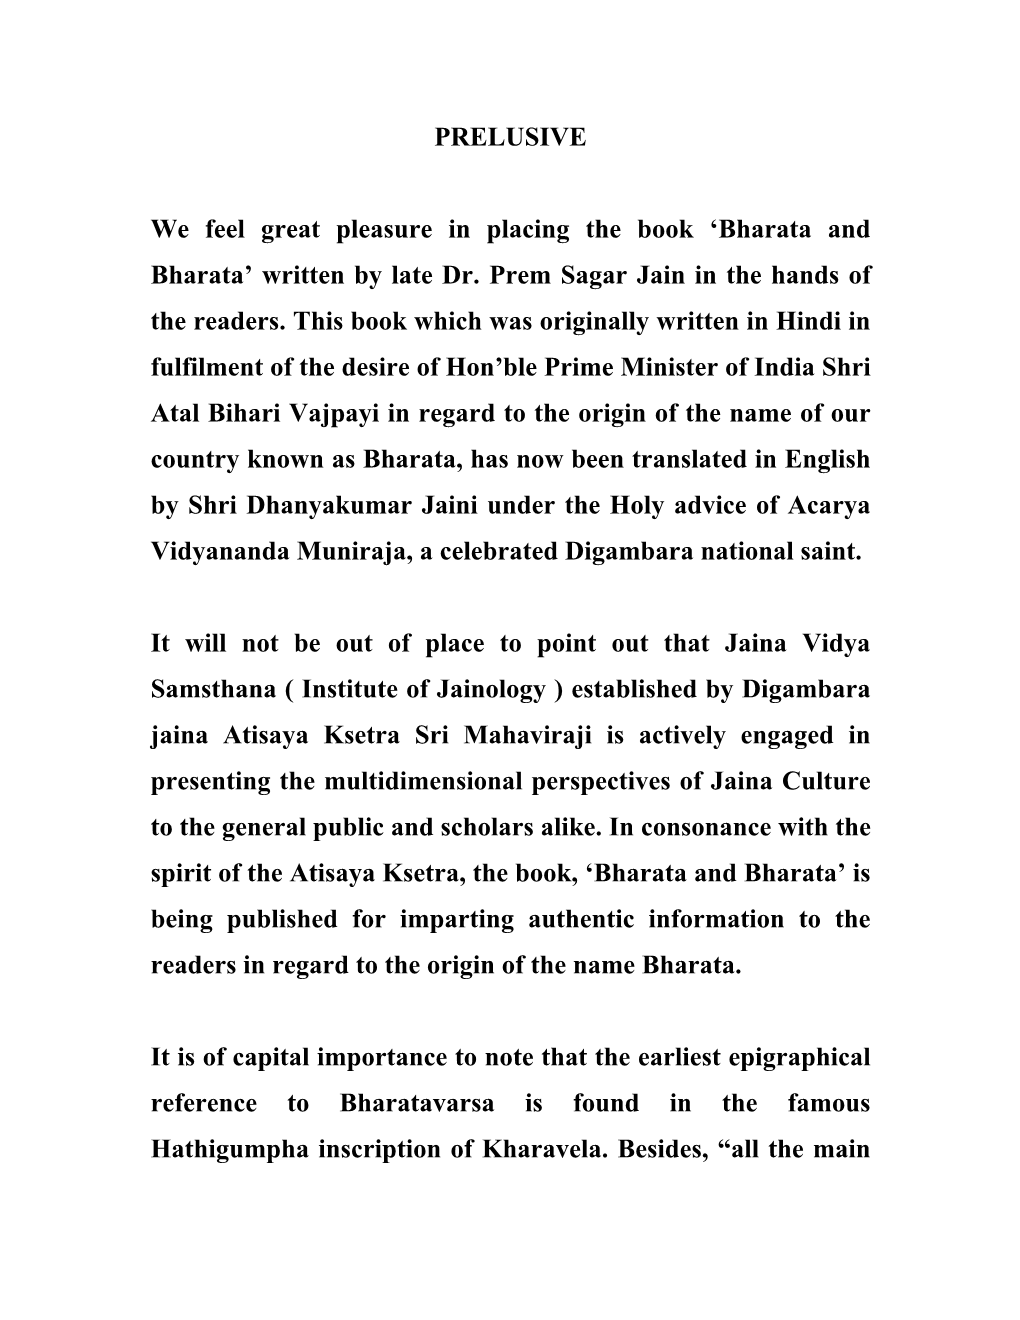 Bharata and Bharata’ Written by Late Dr